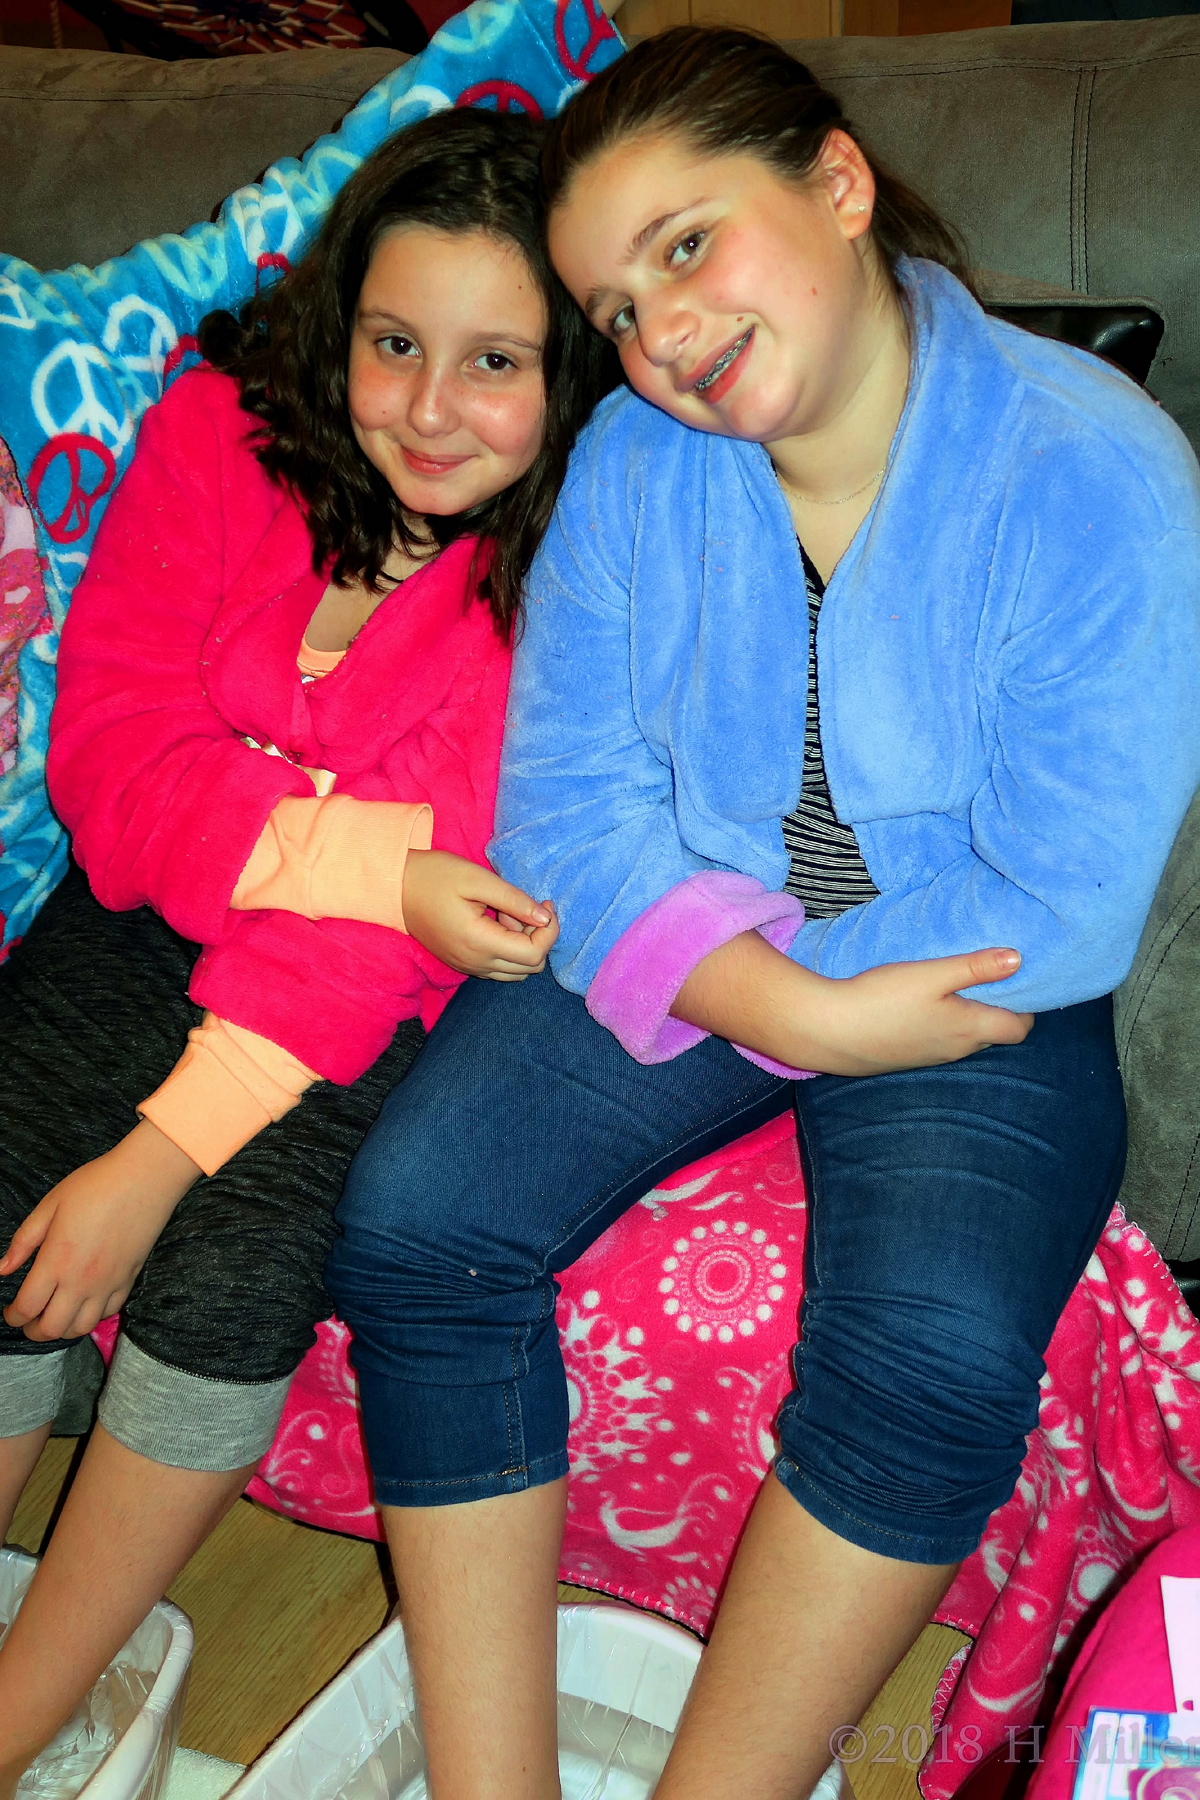 Amanda Poses With Her Friend While Having Kids Pedicure Footbaths! 